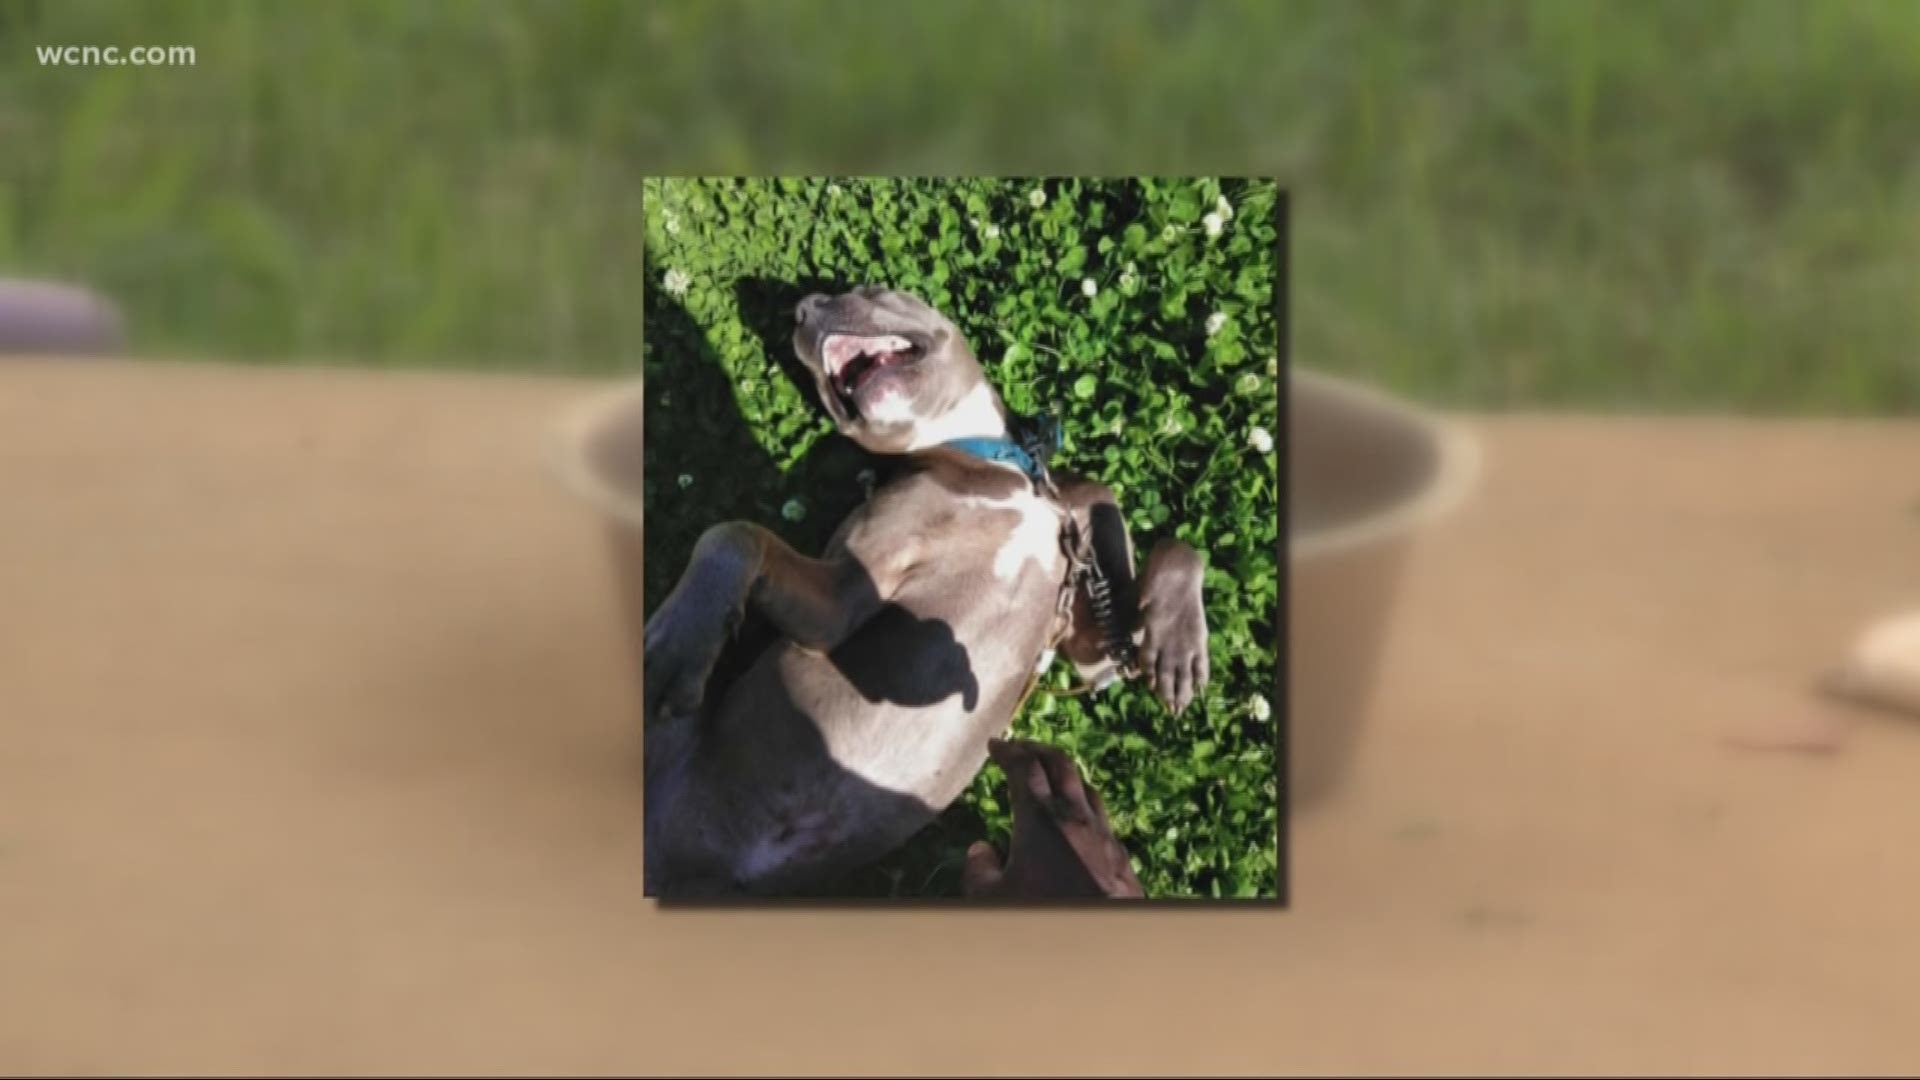 An owner is pleading for help after her dog was shot in the face in northwest Charlotte